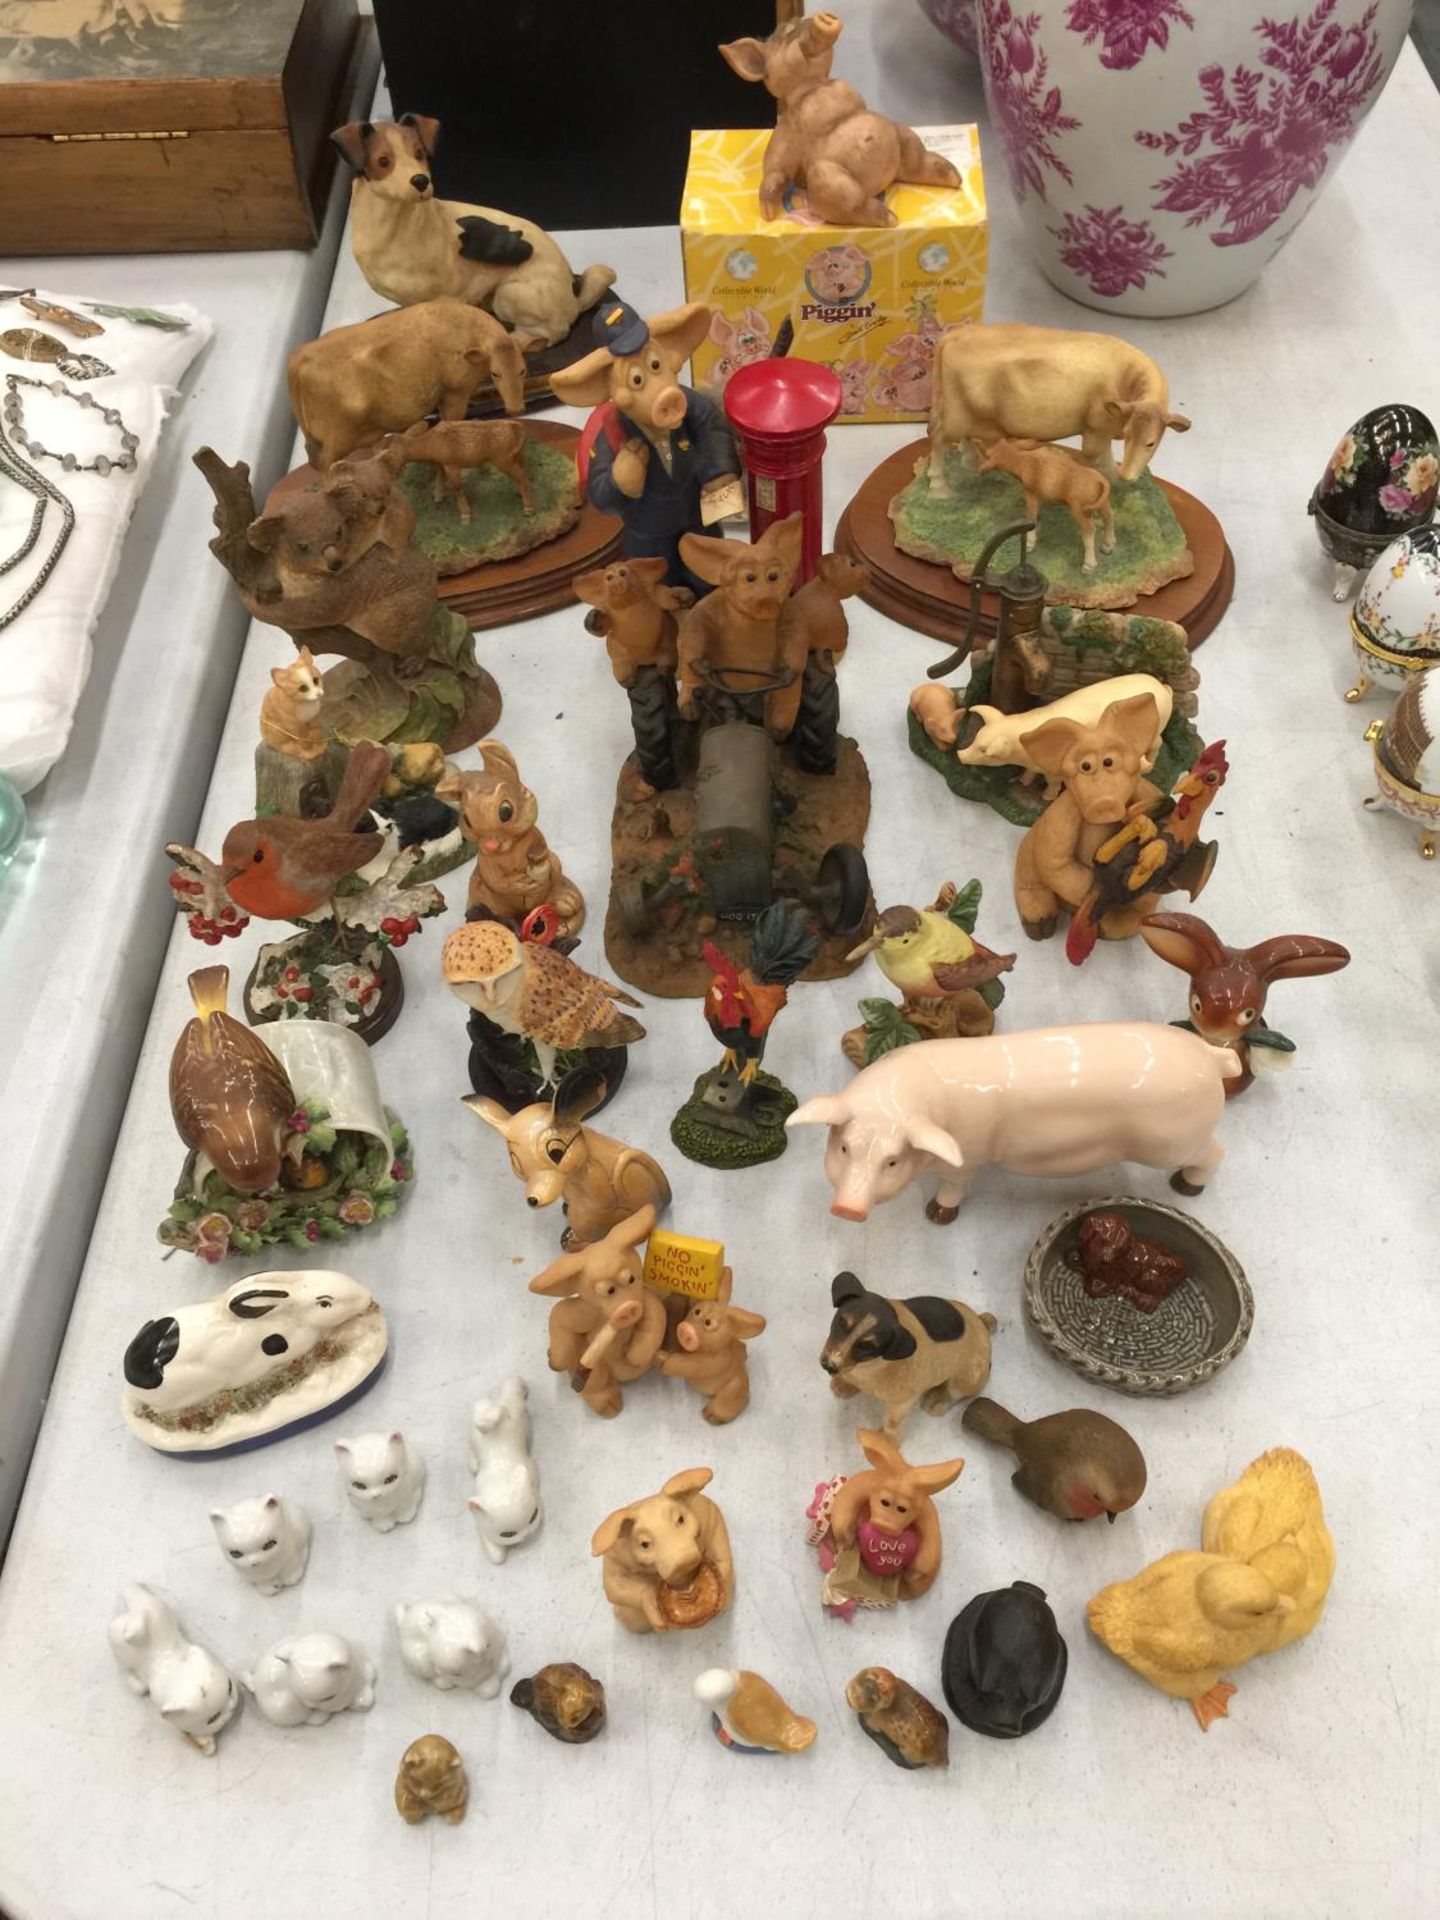 A LARGE QUANTITY OF CERAMIC AND RESIN ANIMAL FIGURES TO INCLUDE PIGGIN', LEONARDO MODELS OF COWS AND